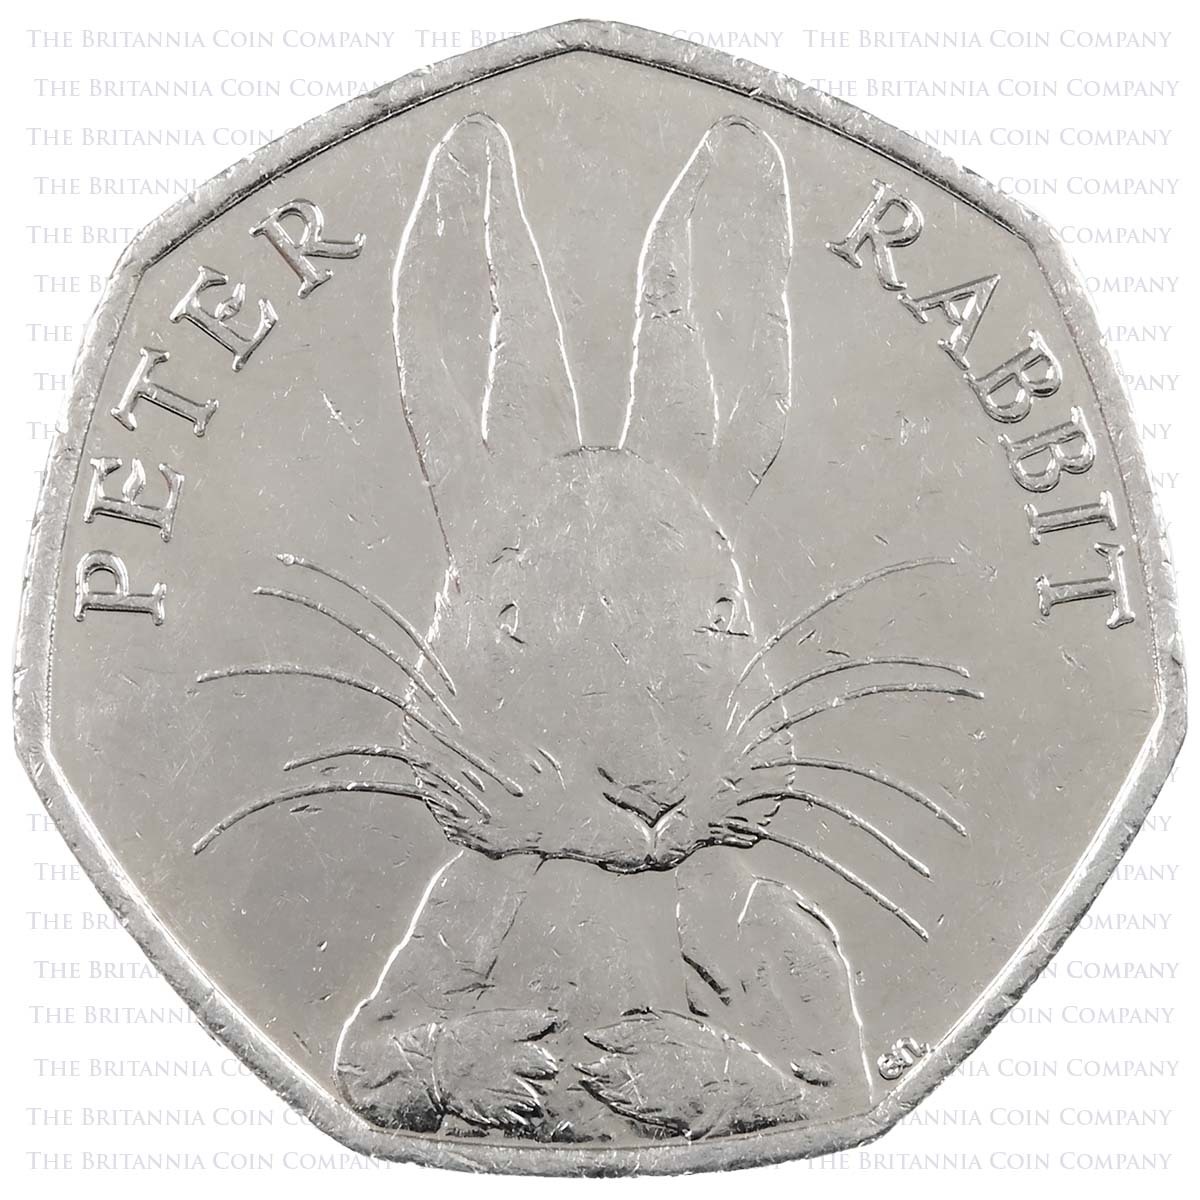 2016 Beatrix Potter Peter Rabbit Circulated Fifty Pence Coin Reverse